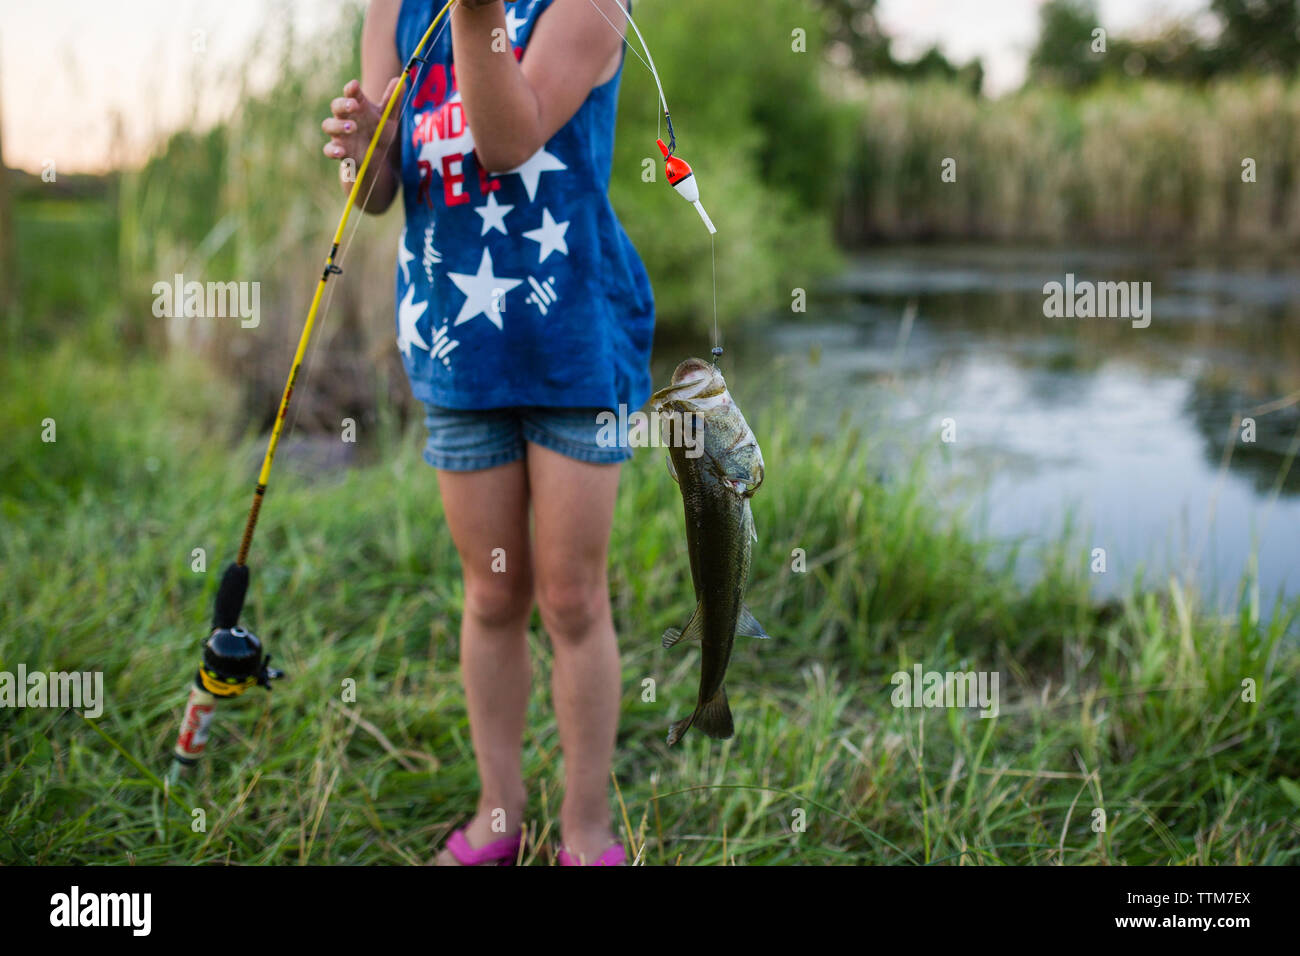 https://c8.alamy.com/comp/TTM7EX/midsection-of-girl-holding-caught-fish-in-fishing-rod-while-standing-by-lake-TTM7EX.jpg